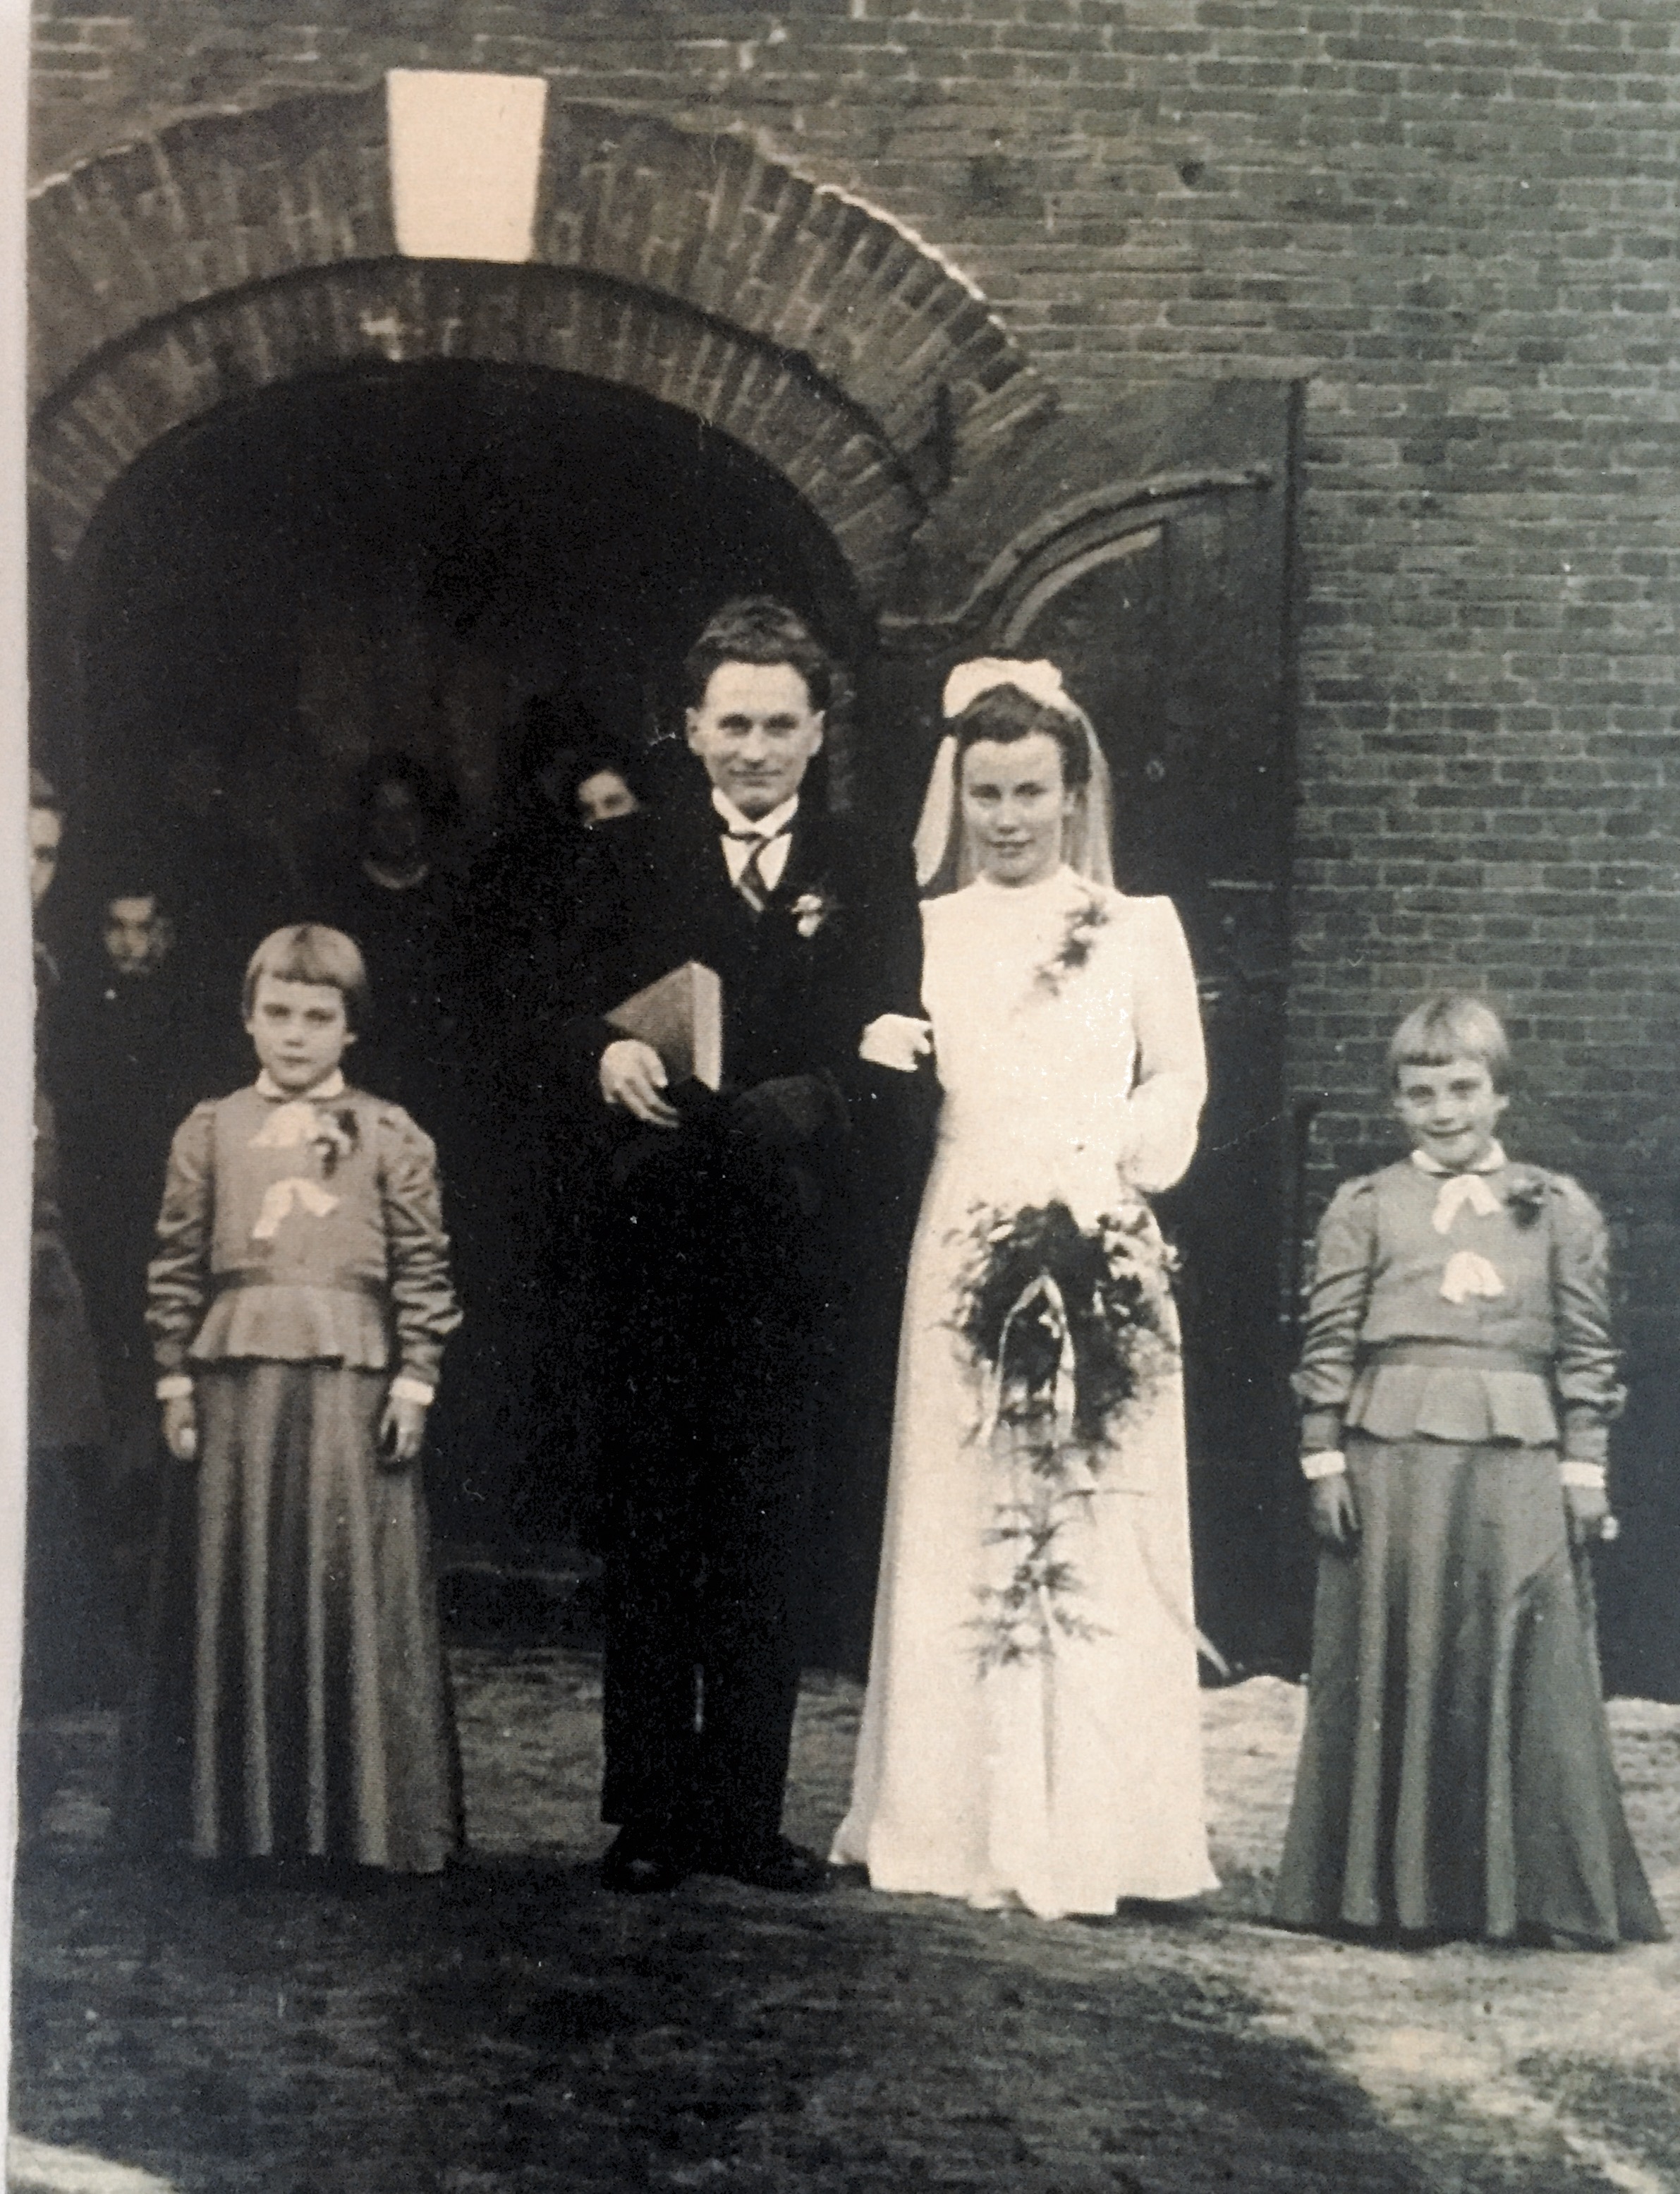 Jan 5, 1944. Geert DeVries and Griet VanderZwaag marriage. Tiny VZ and Hillie VZ mom‘s younger sisters were the bridesmaids. Mom‘s dress: a teacher in school was the daughter of the owner of a textile company and a school board member. She got mom, the fabric without ration points and made her the dress and a long slip, the veil was a friends which they cut down and remade. The shoes and white stockings were also the friends. Mom did not see her again until Oma‘s funeral. Geert wore a suit borrowed from a minister that his aunt Assel, a nurse ,used to for briefly when his child was born. That man also lent dad the necessary black gloves. The tall hat was borrowed from the blacksmith friends of Geert. The . The tie needed to be black-and-white. Oom Jap (Geert’s brother in law) was volunteered by his wife (Tante Wieke, Geert’s sister on the day of the wedding to exchange ties with dad. The girls dresses were made by.Tante Wieke ( Mom’s sister) out of curtain fabric from Opa’s store. Bows were made out of fabric. Normally used for underwear, shoulder straps.